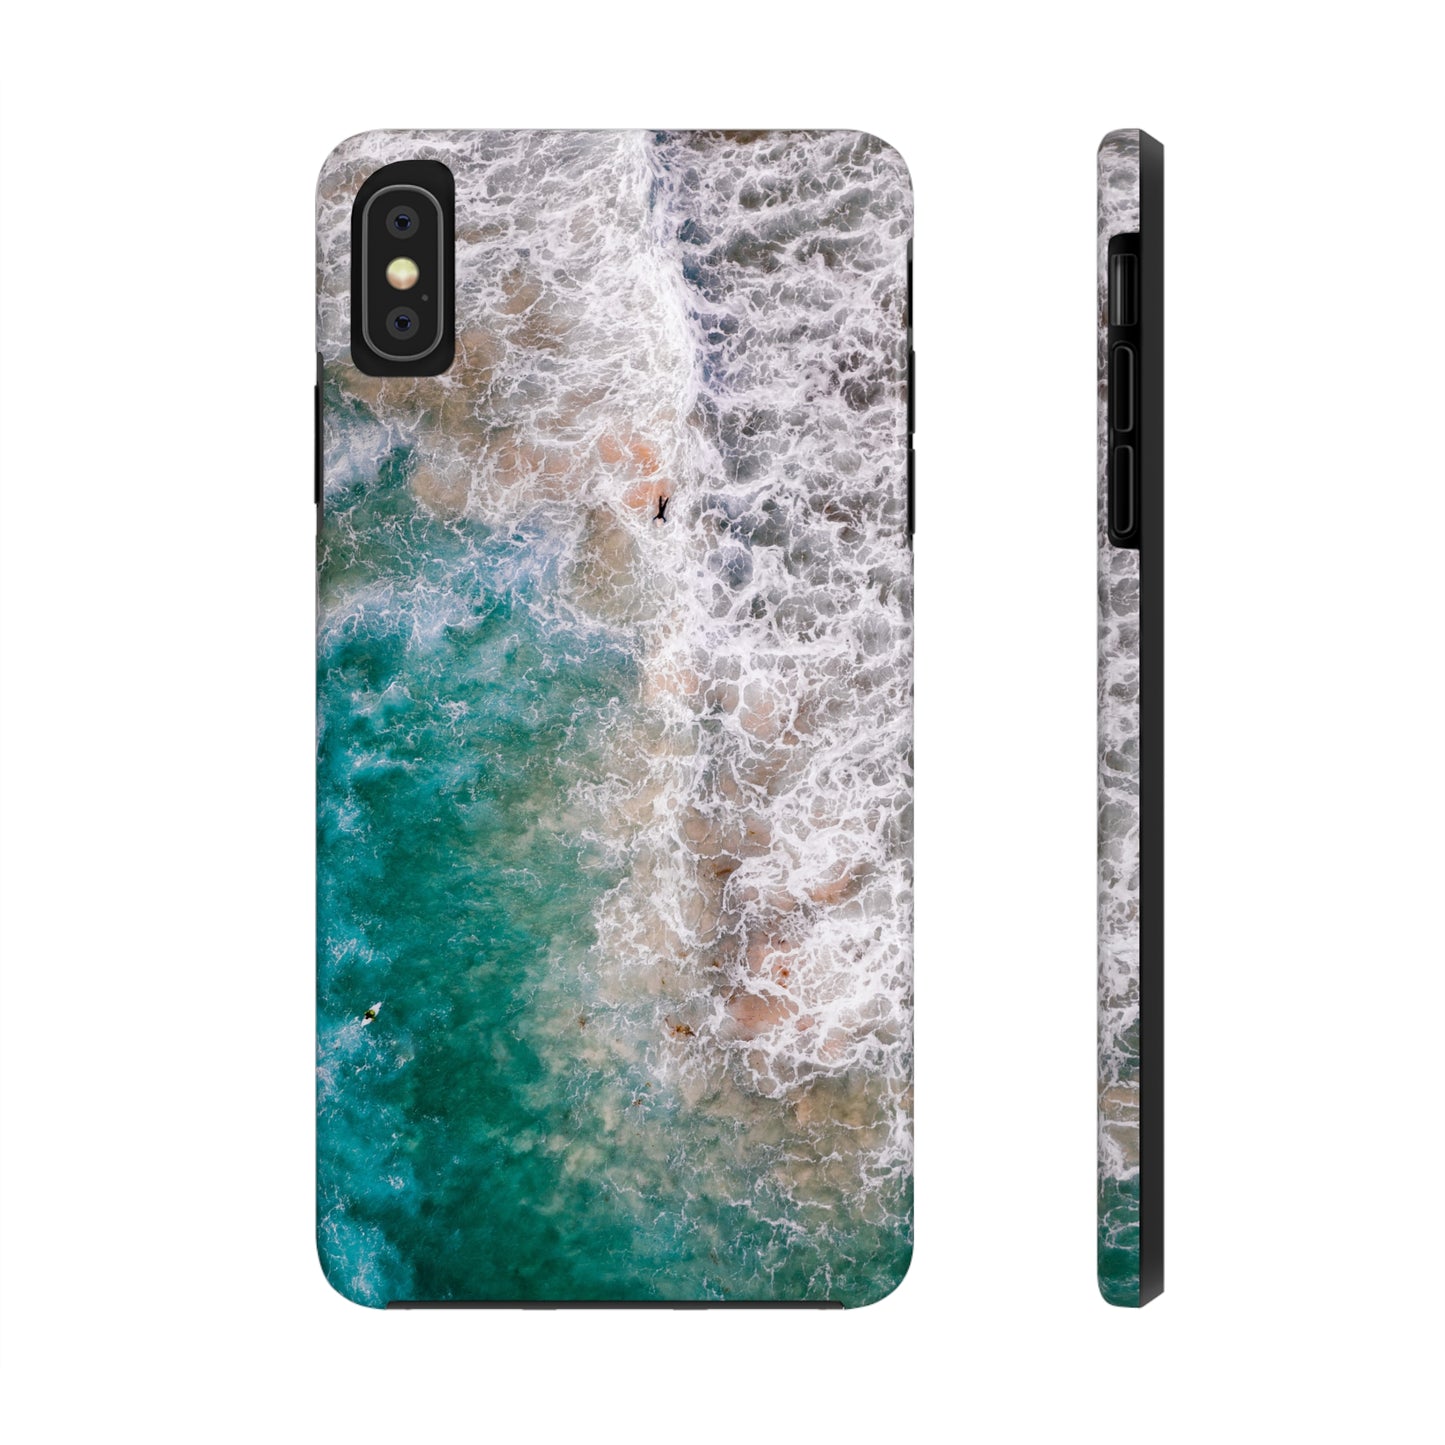 Ocean's Embrace: Deep Green Waters with White Waves Crashing onto the Beach Design Iphone Tough Phone Case